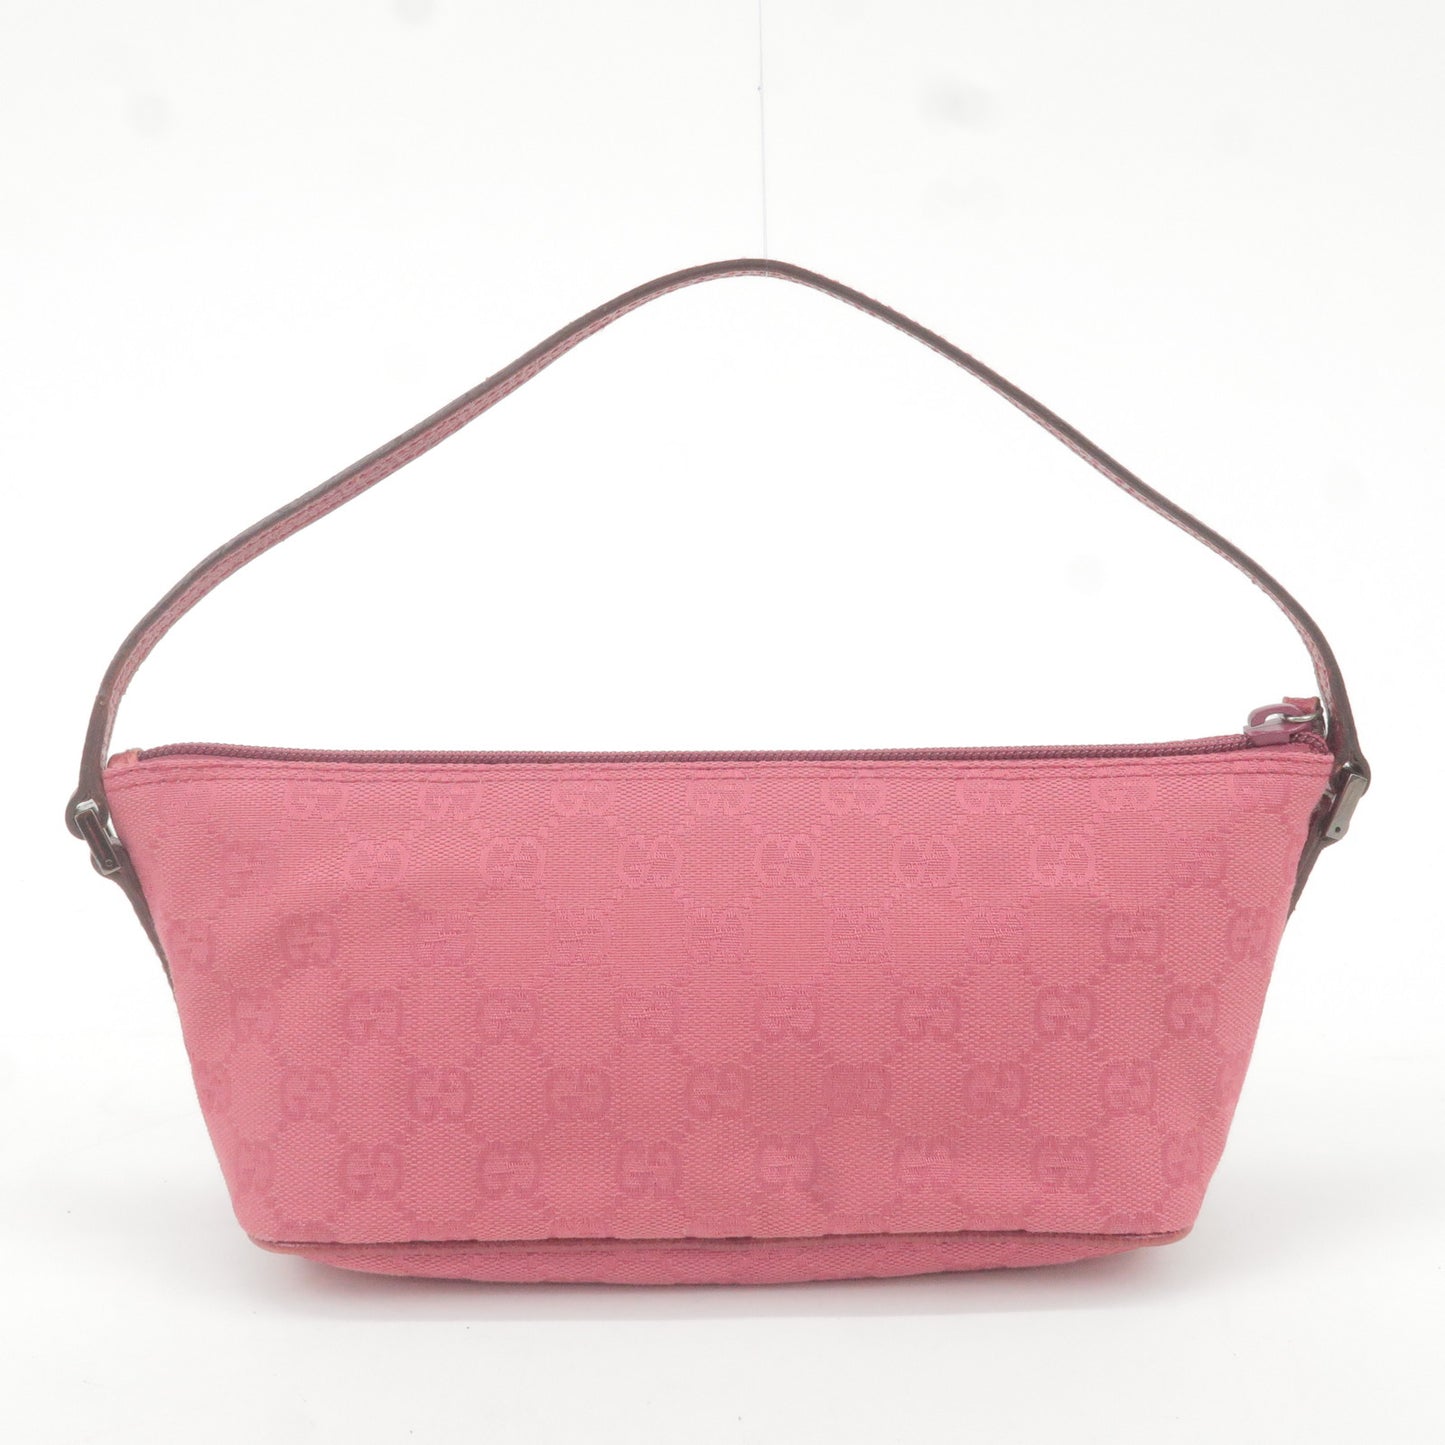 GUCCI GG Canvas Leather Boat Bag Hand Bag Pink 07198